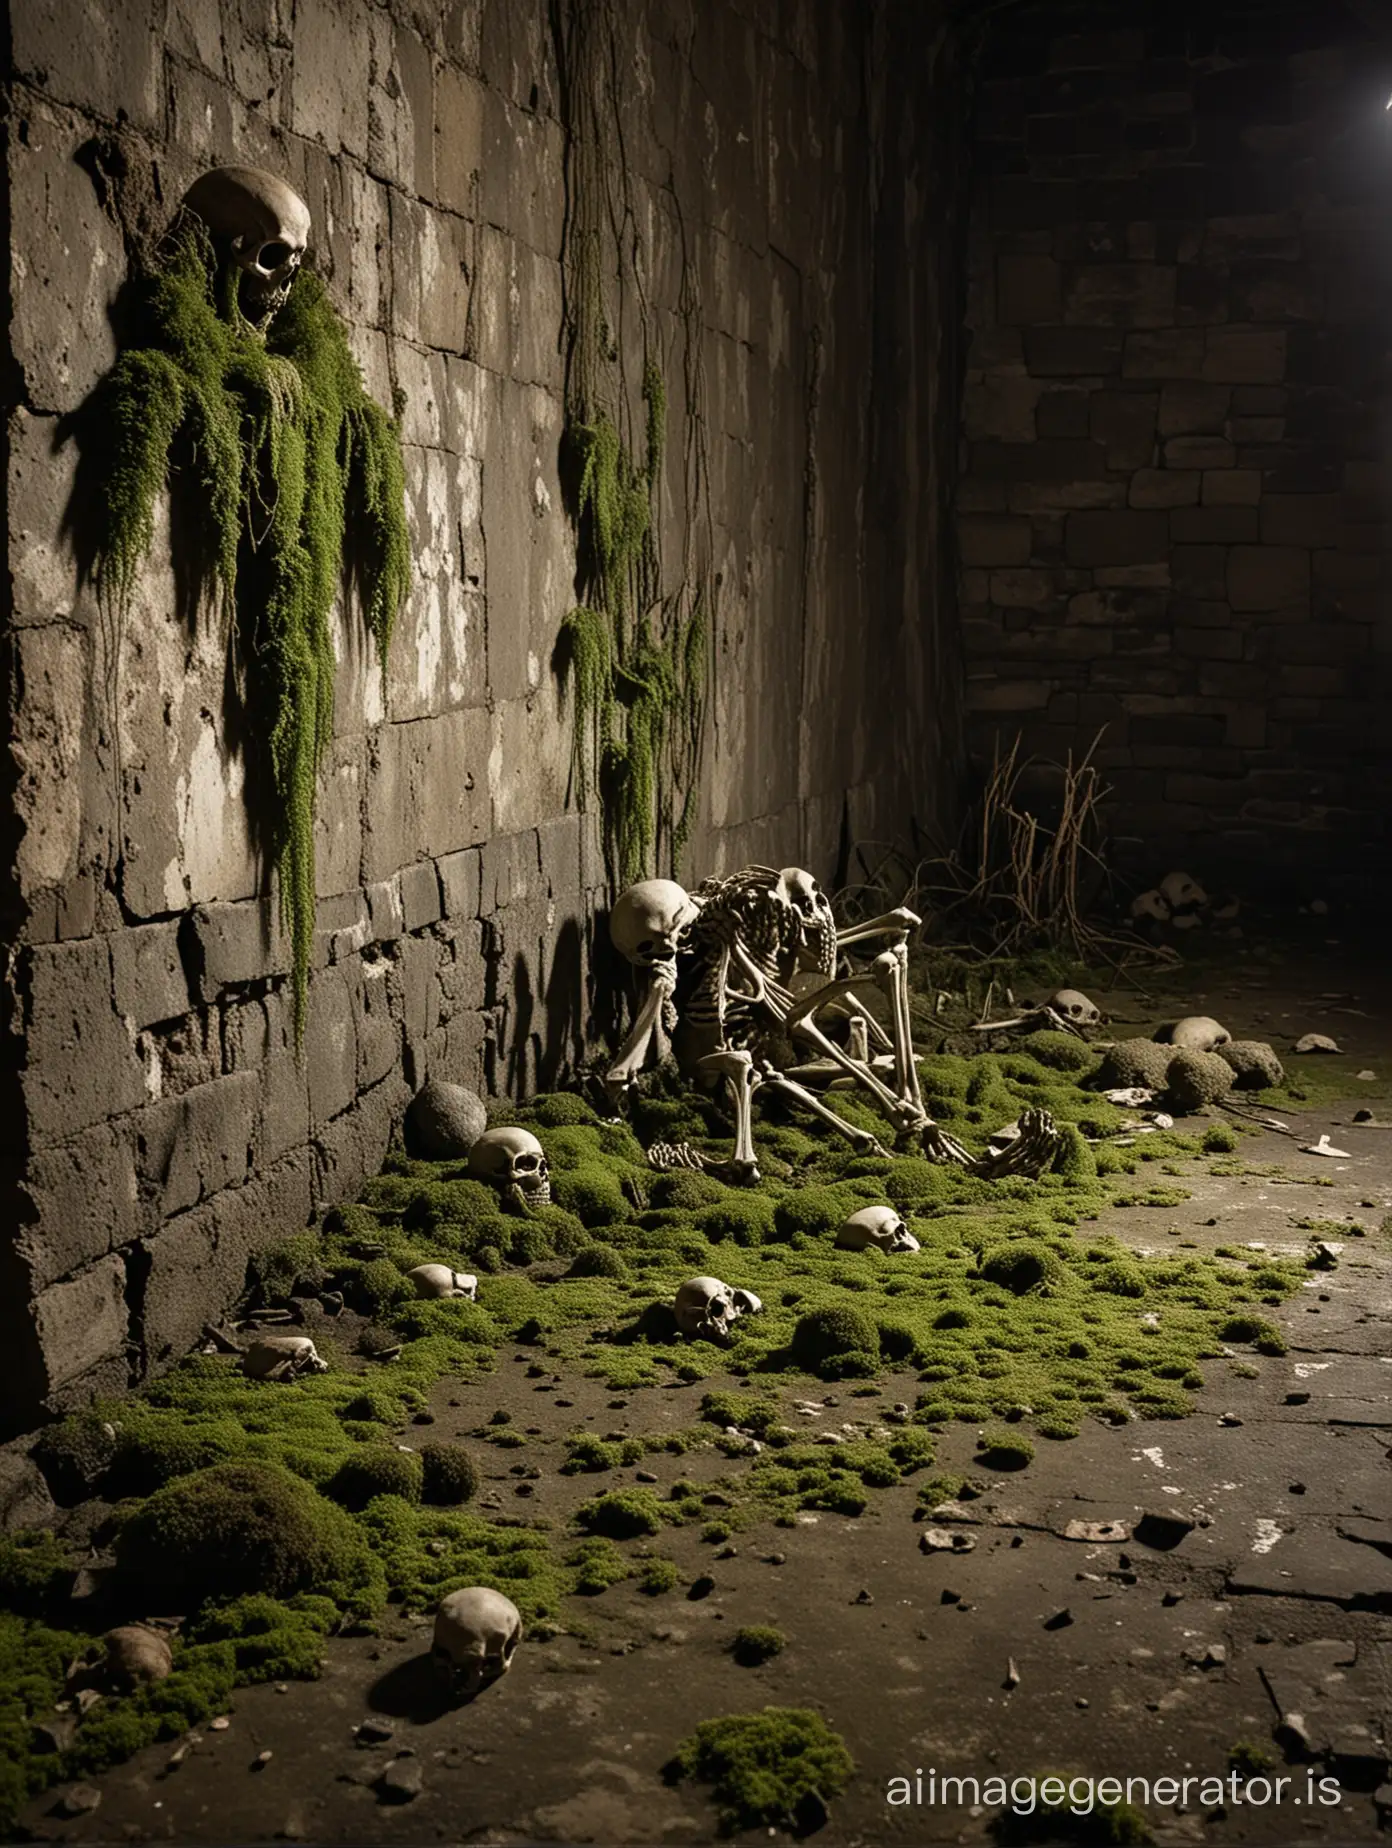 [crouching monsters hiding] in an old dungeon. [dead skeleton] and bones scattered around the floor. very low light. moss and floor and walls. rotting tapestry on walls